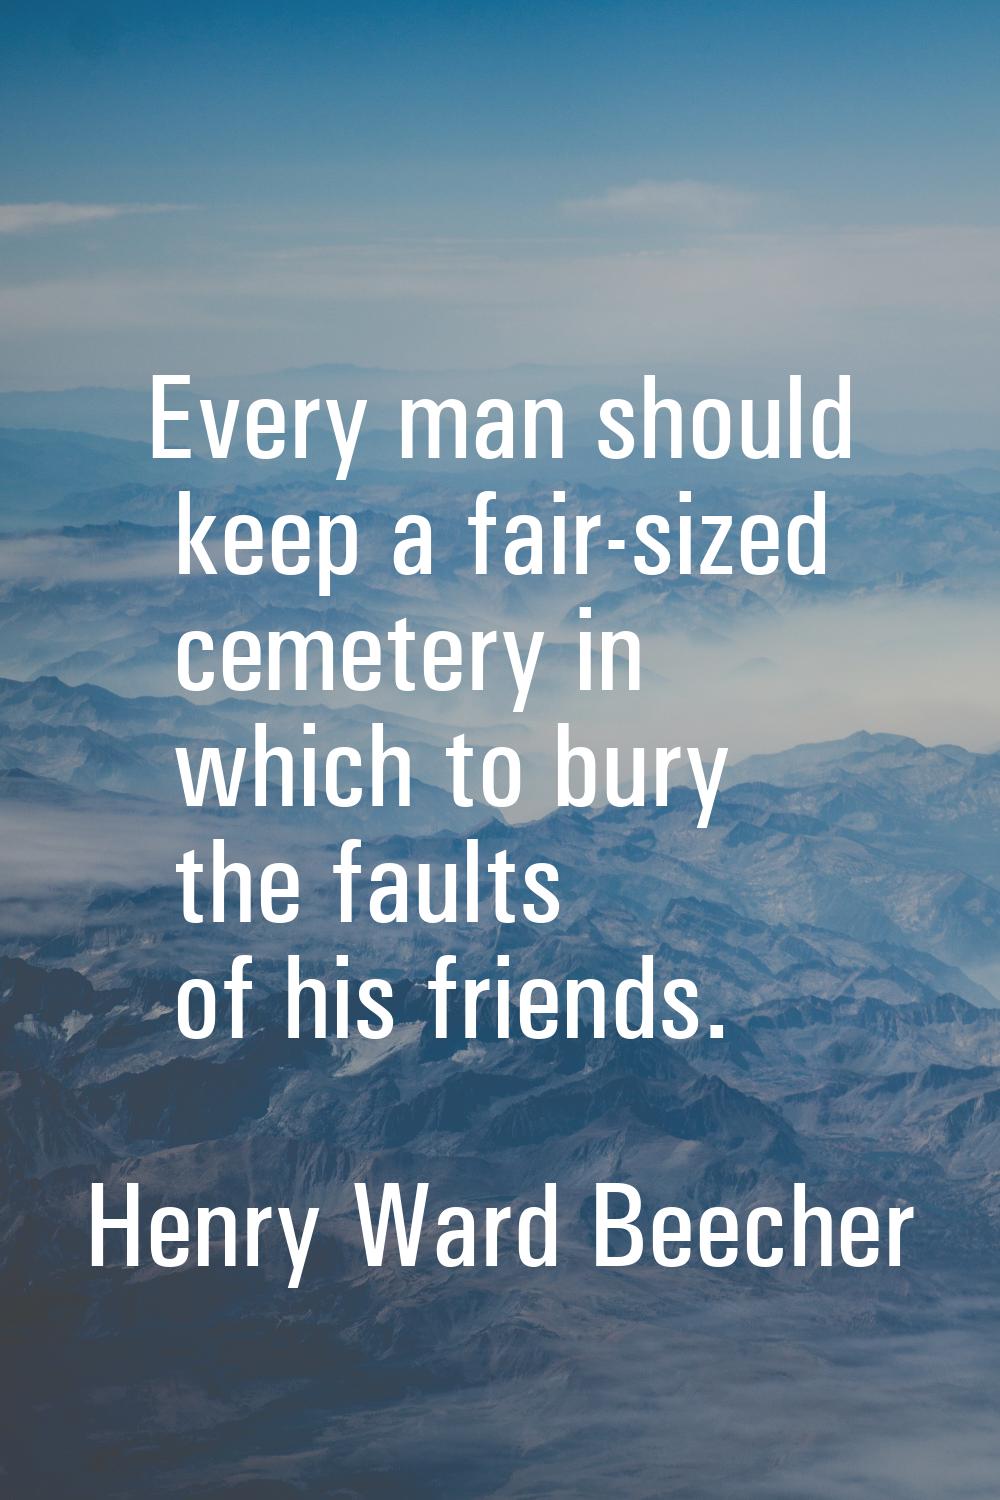 Every man should keep a fair-sized cemetery in which to bury the faults of his friends.